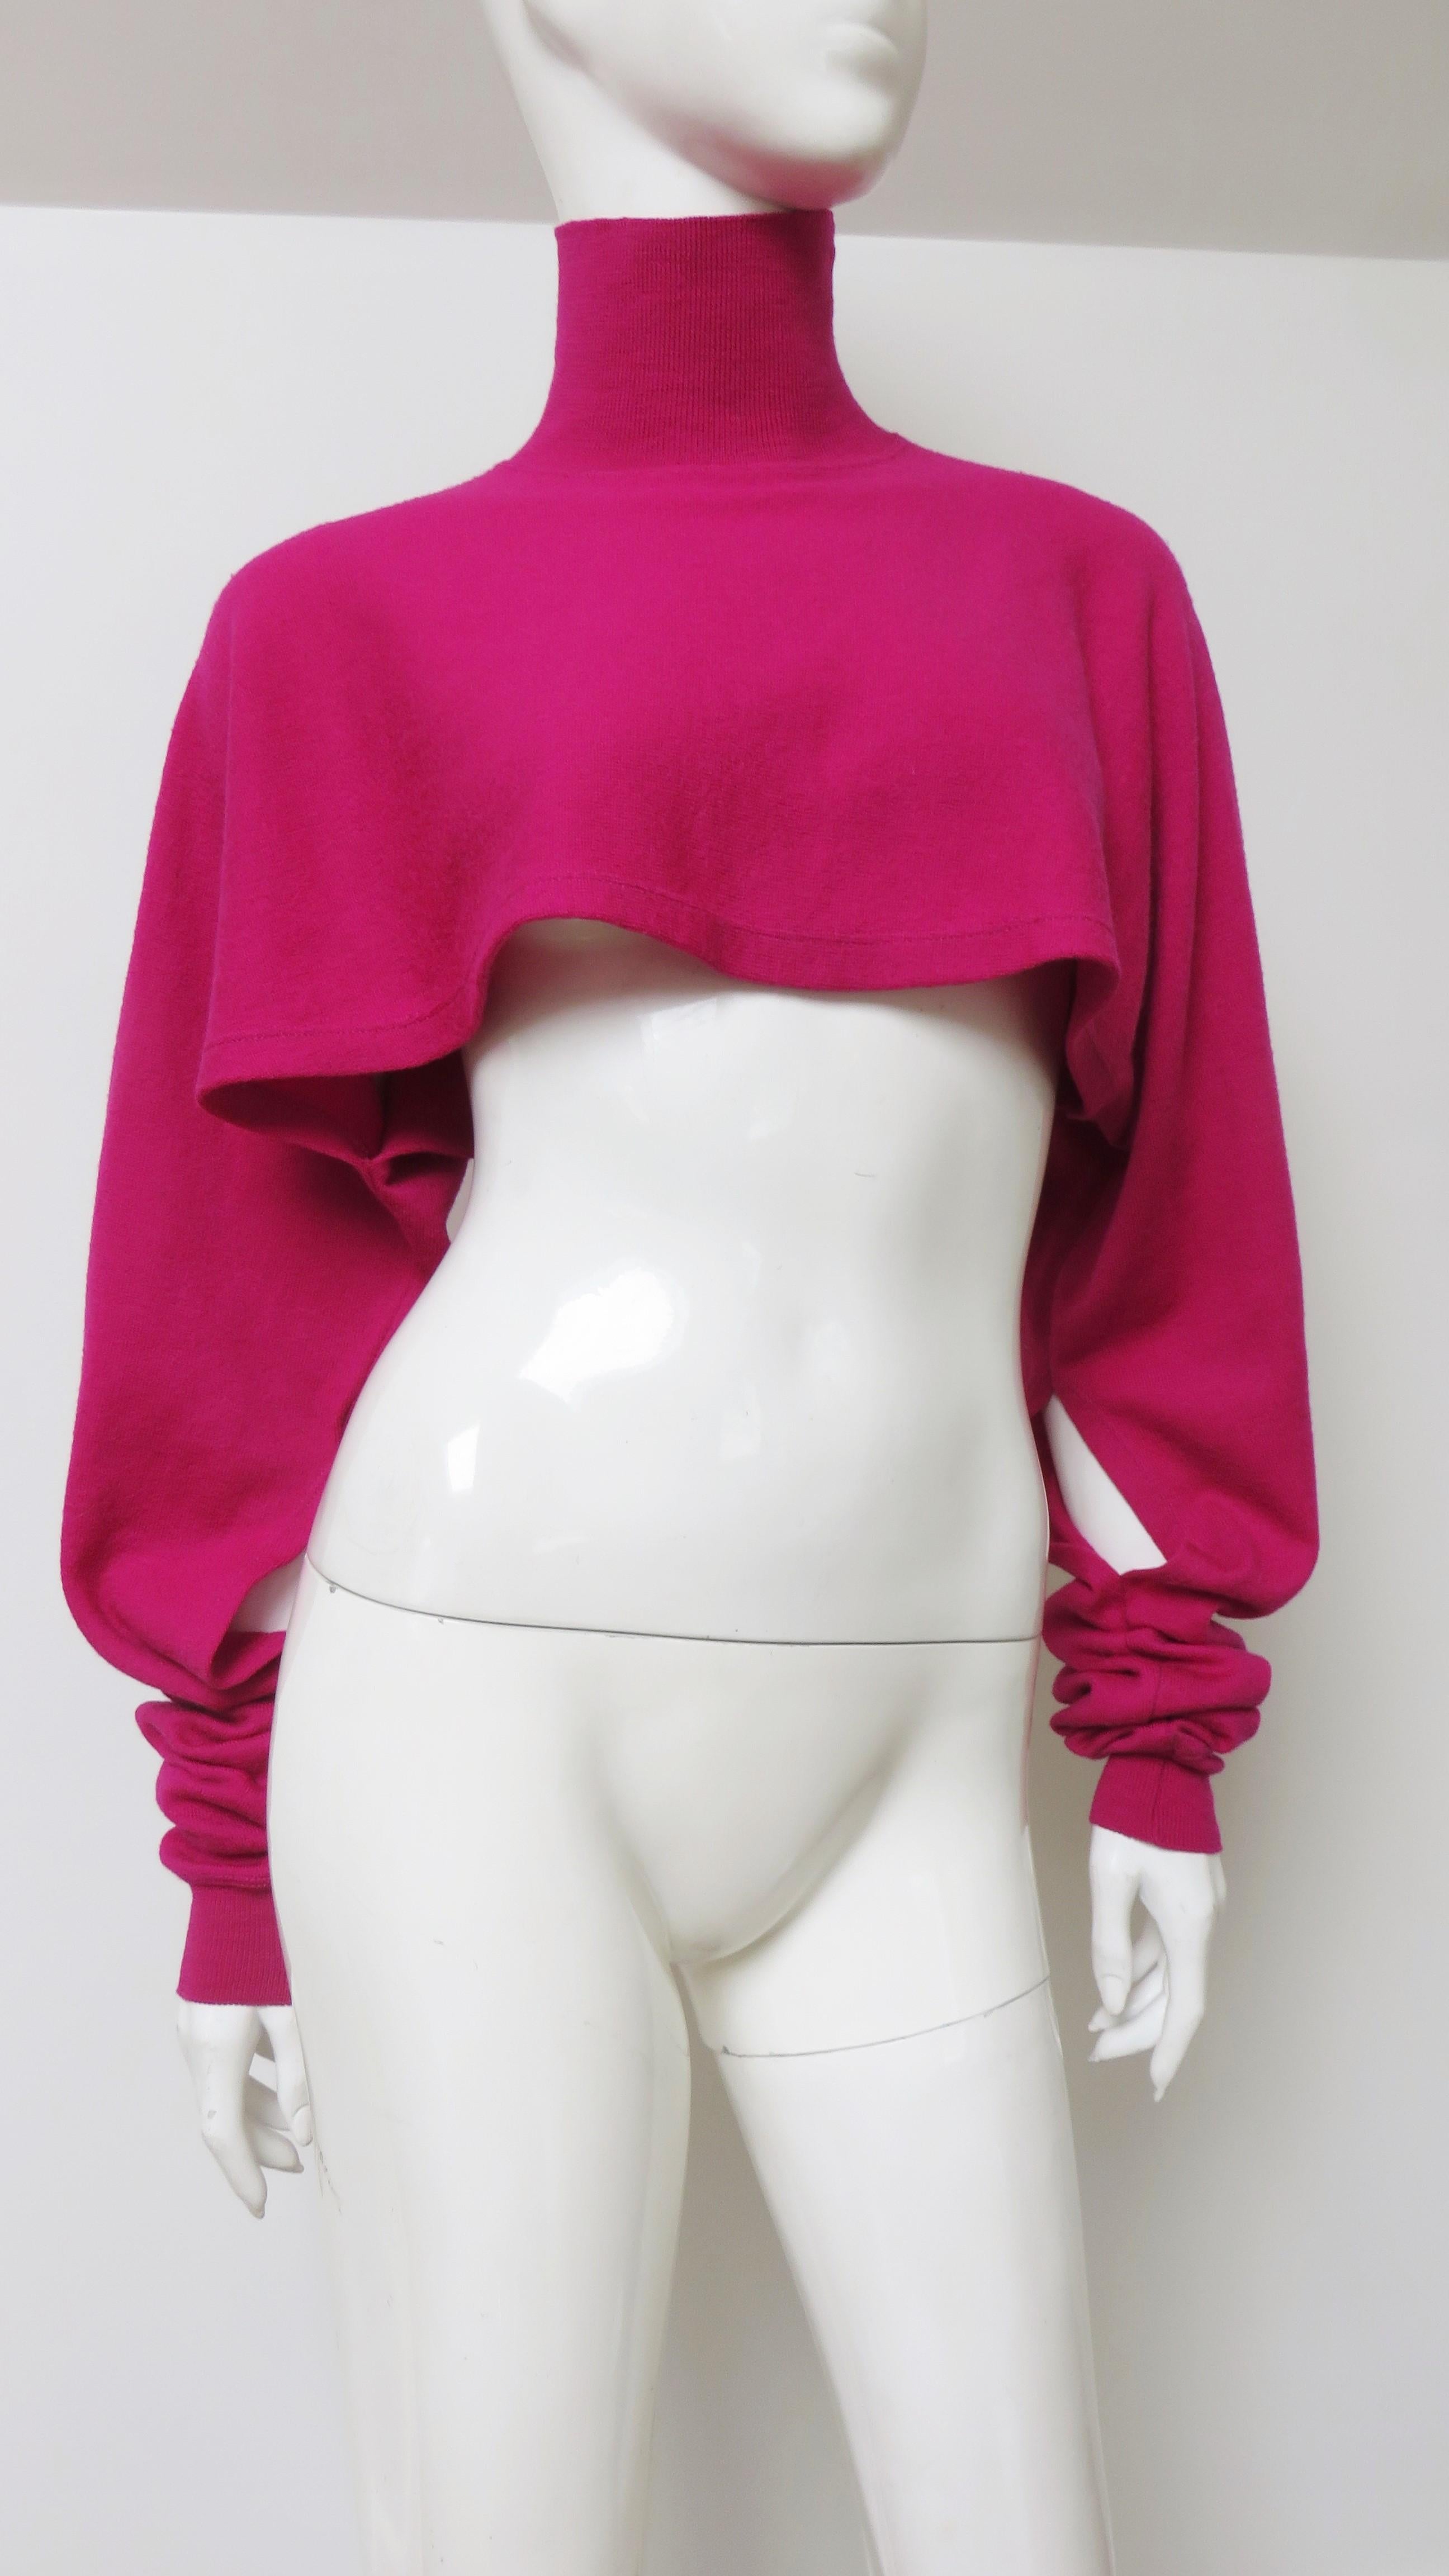 A fabulous bright pink wool cropped sweater from Jean Paul Gaultier.  It has a turtleneck, long cuffed dolman sleeves with cut outs at the inner forearms and a full body cropped just below the bust.  The turtleneck and cuffs are ribbed.
Fits sizes